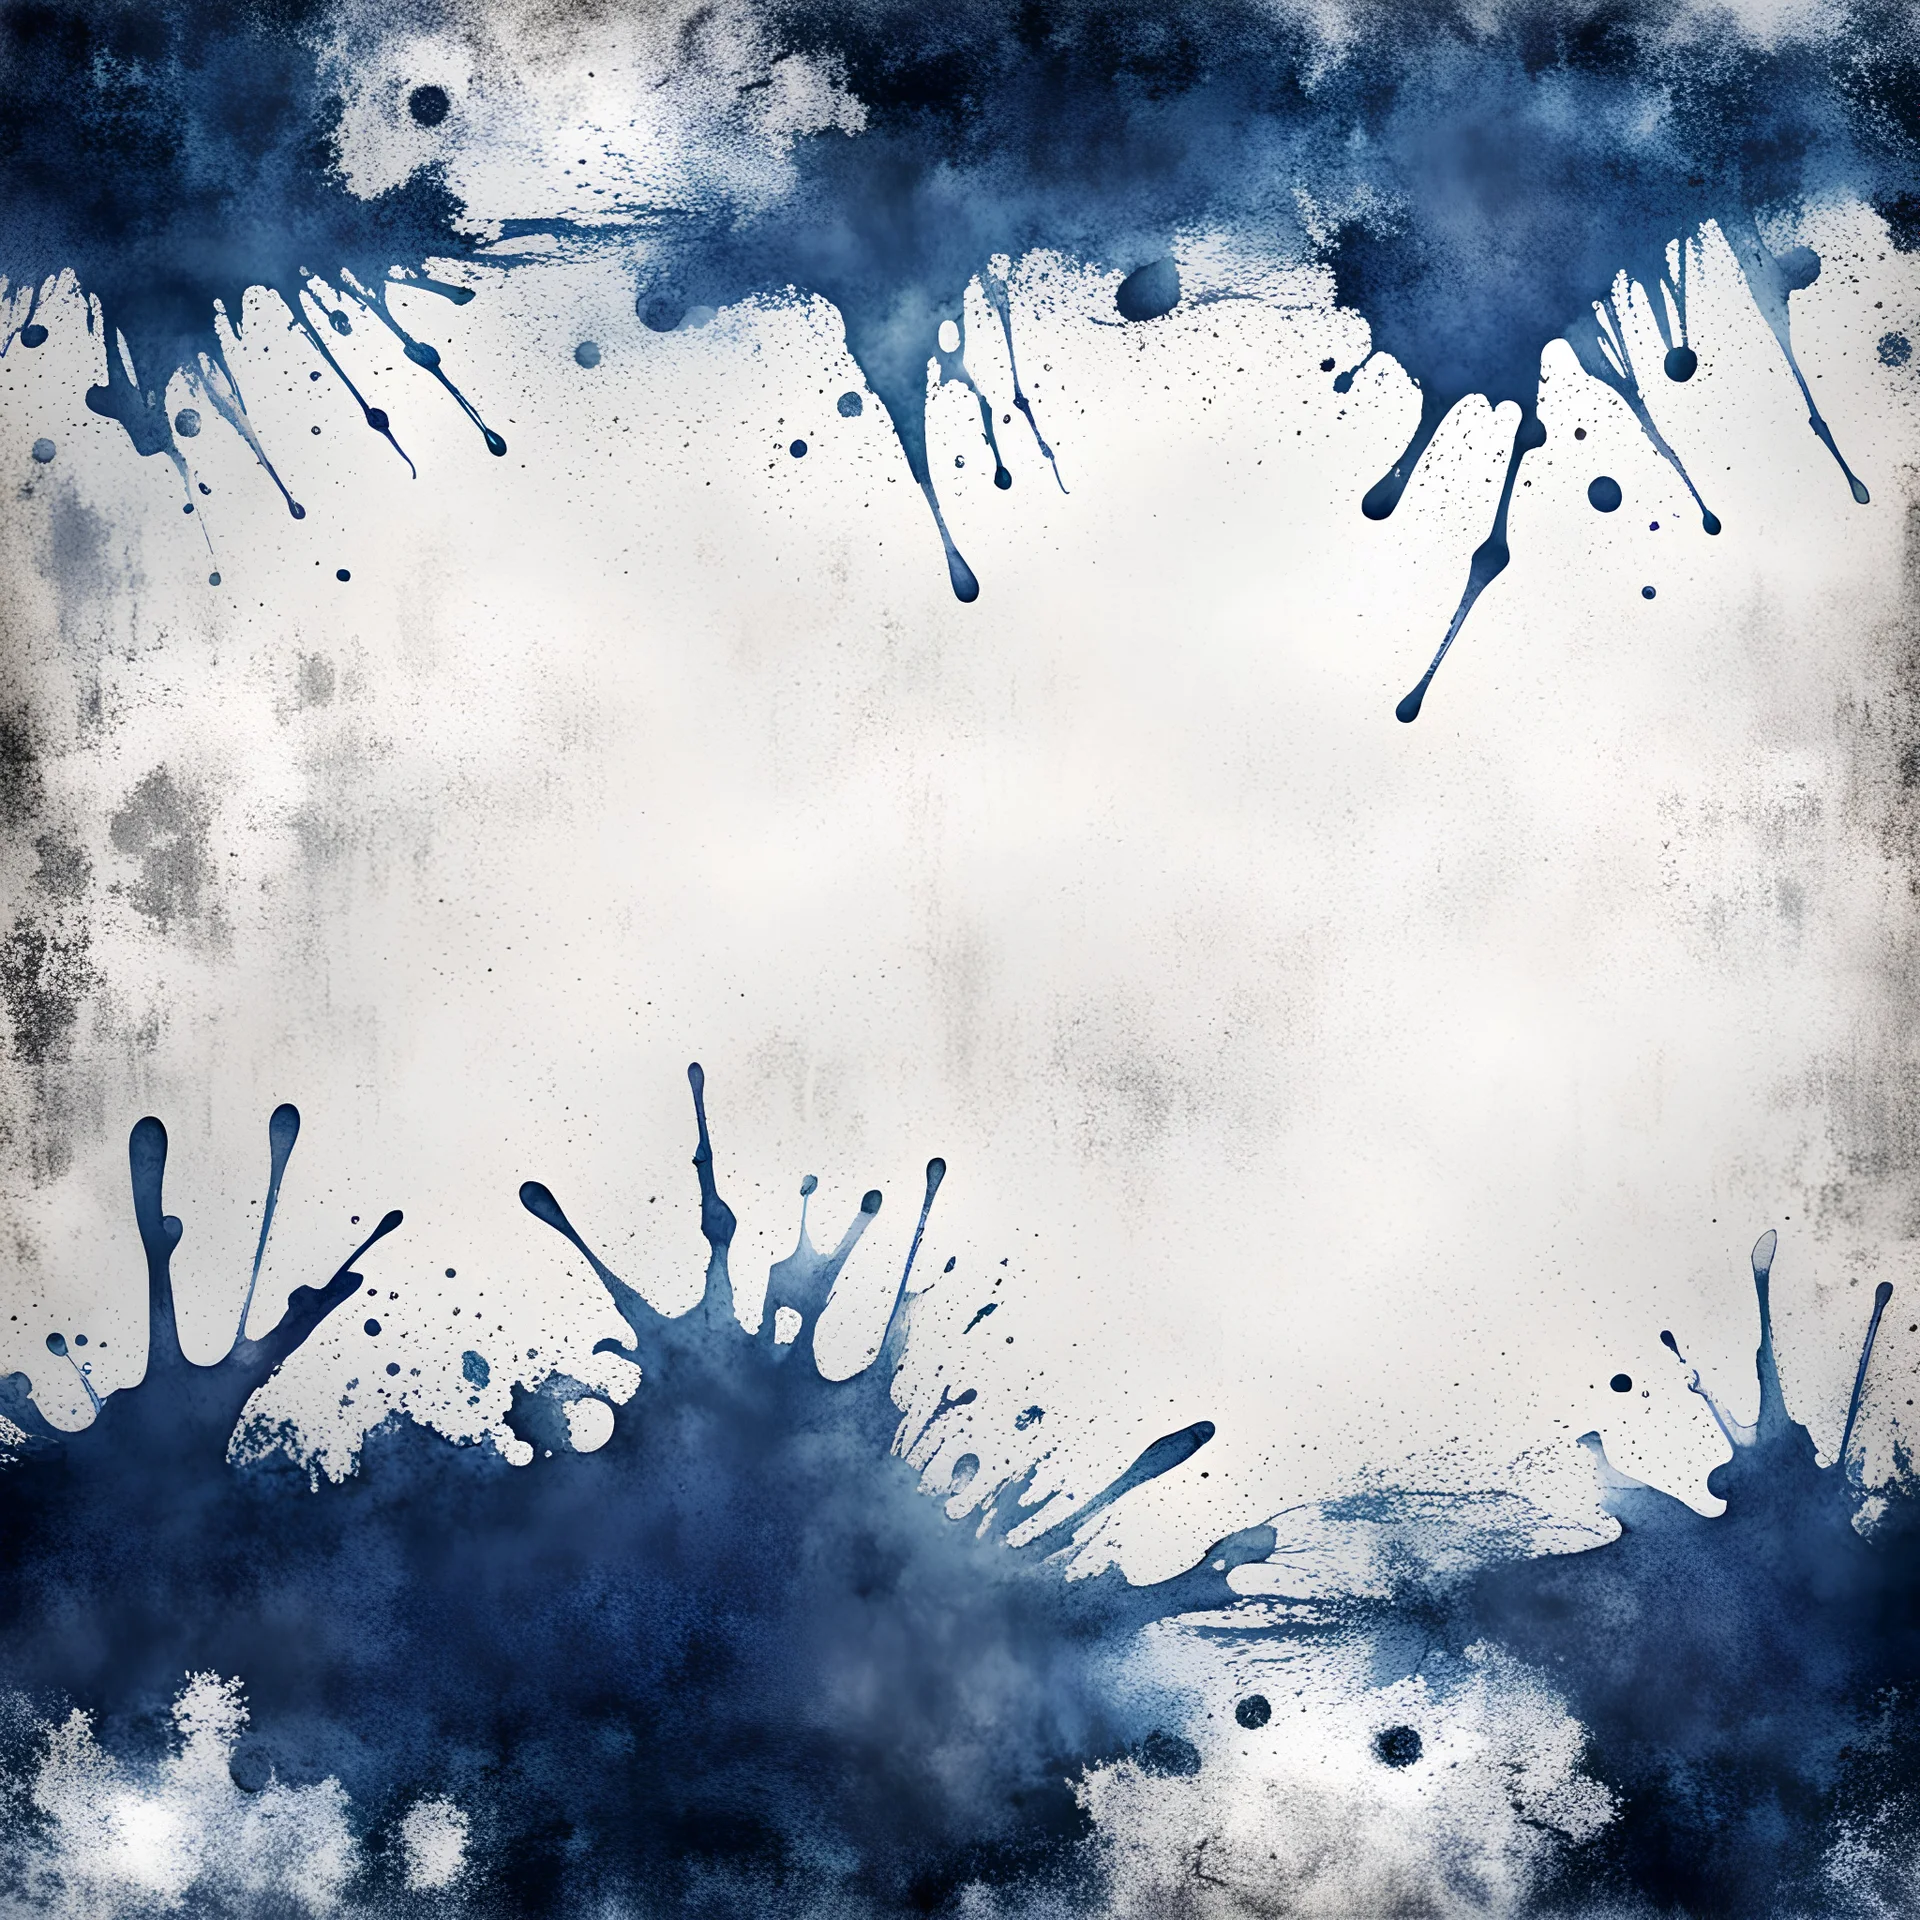 Hyper Realistic Navy-Blue & White Grungy-Background